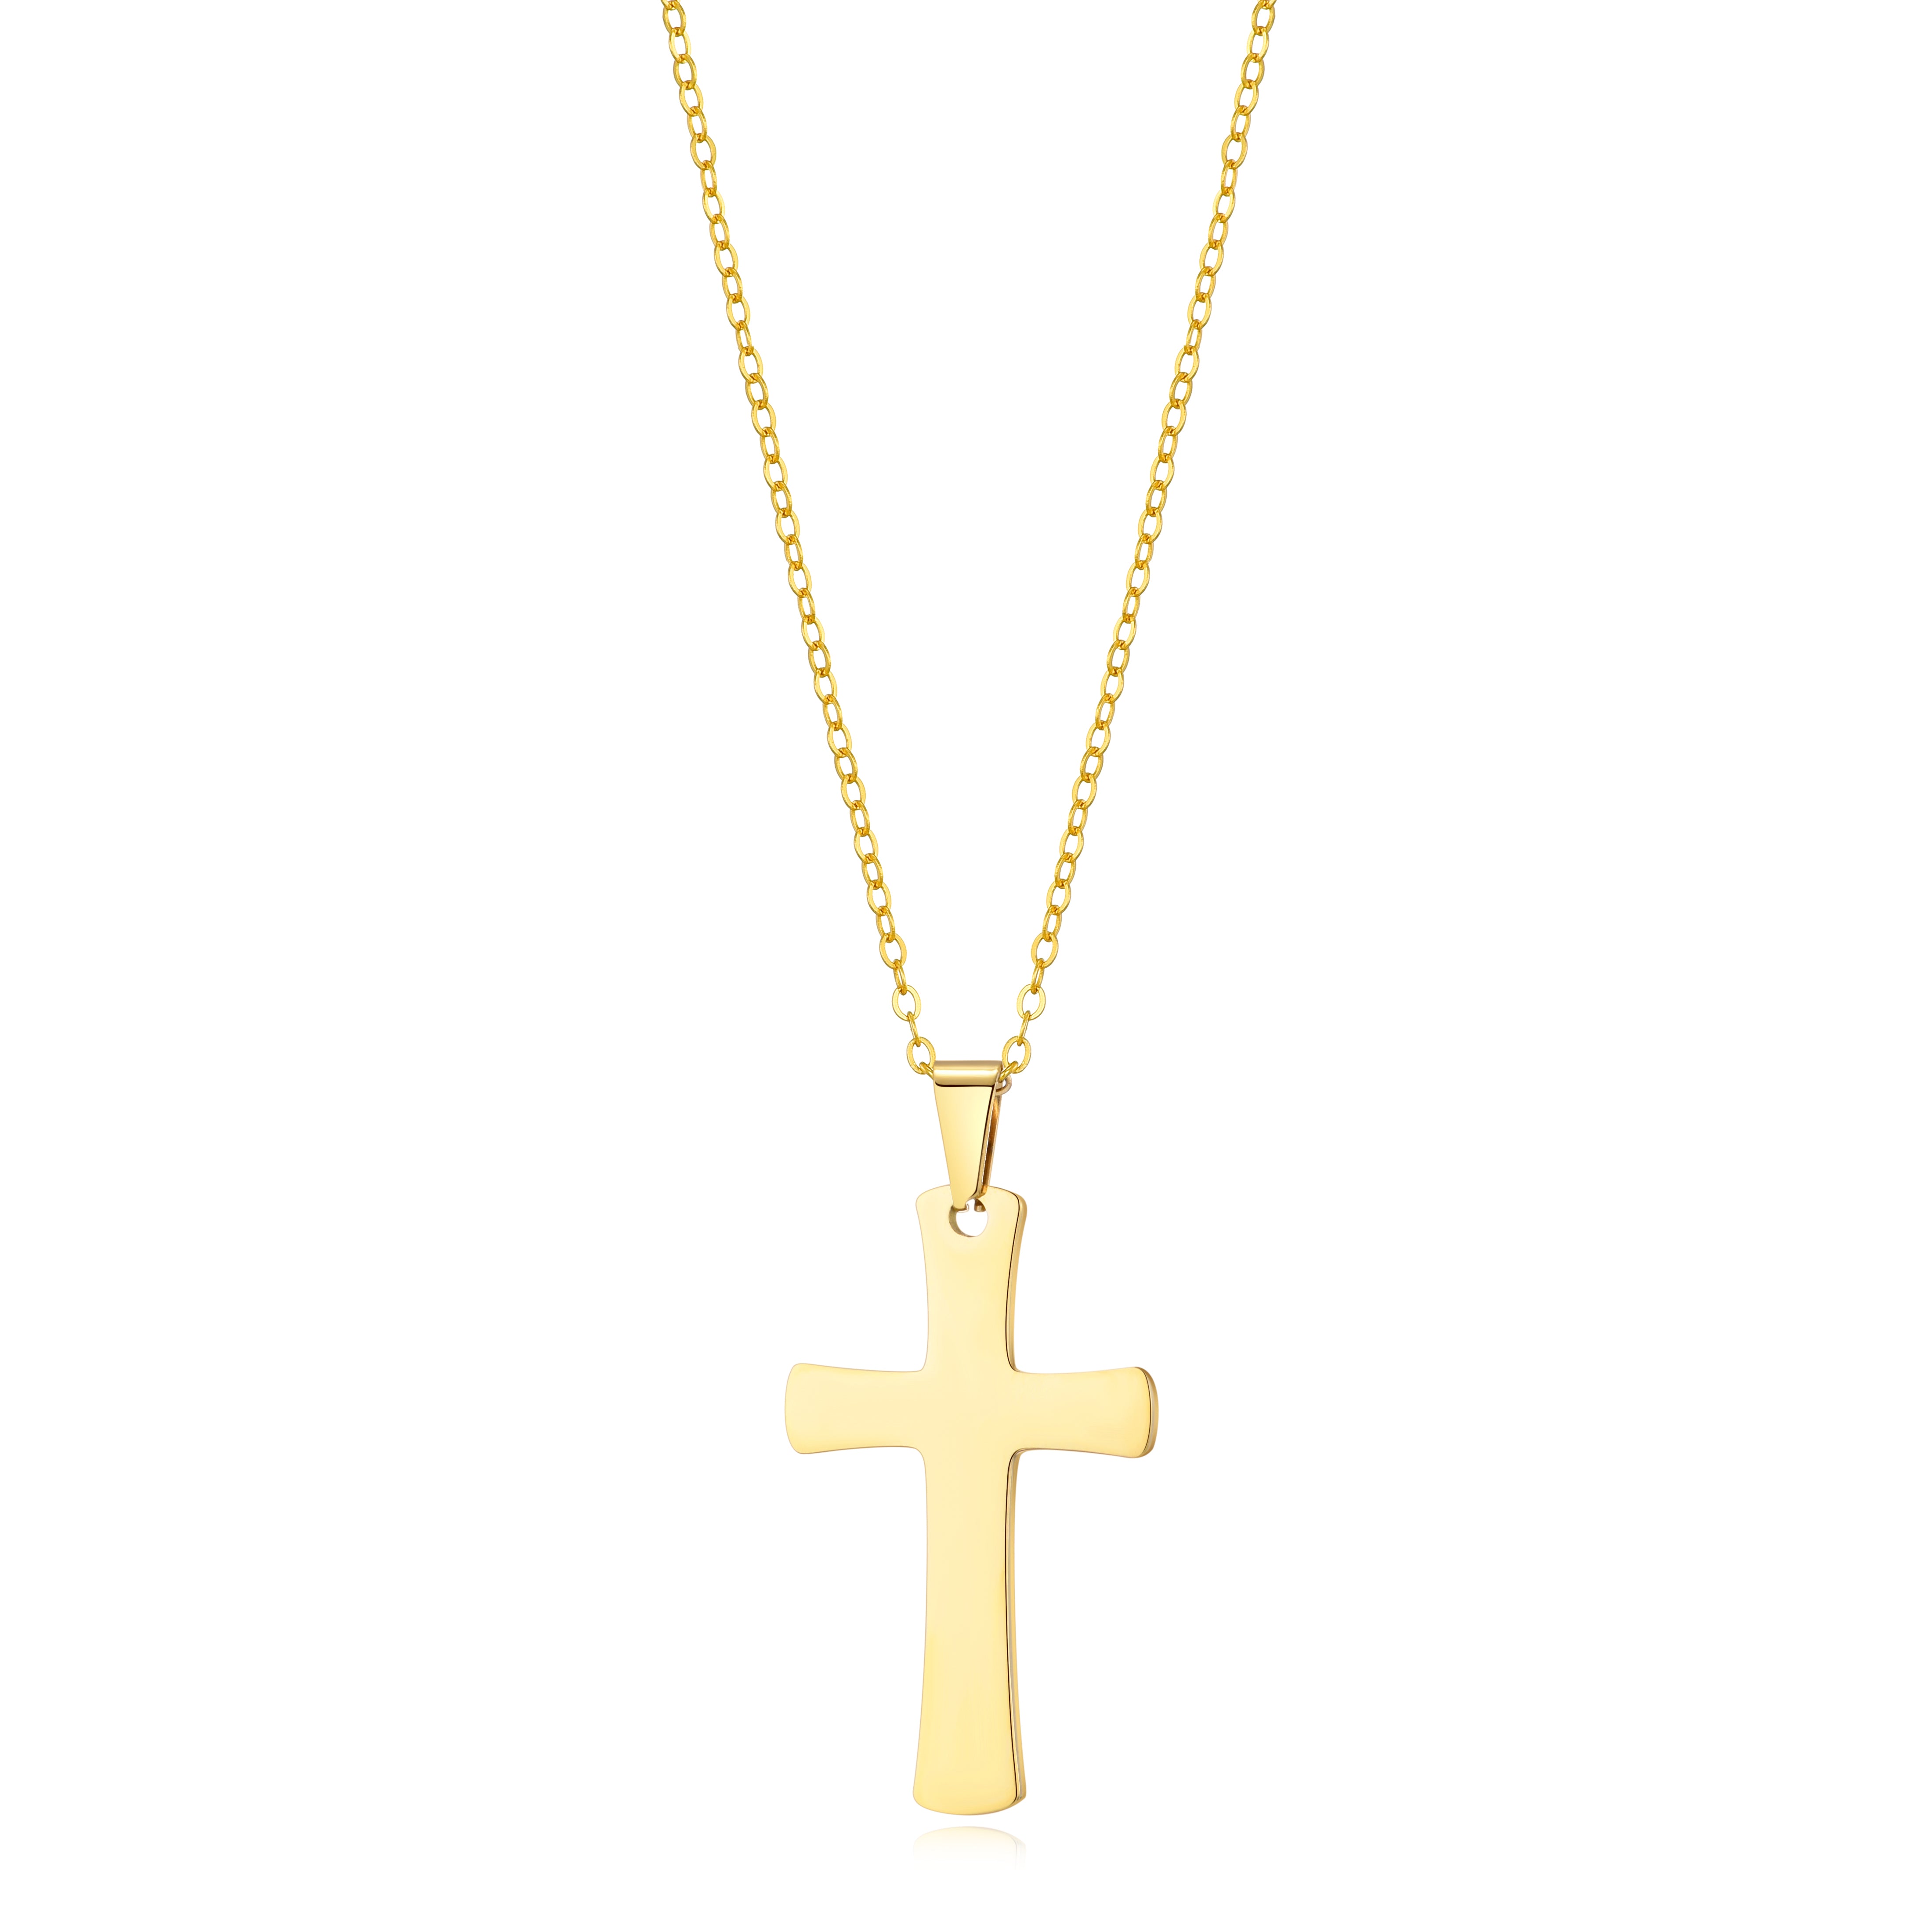 Men's Gold Plated Stainless Steel Cross Necklace by Philip Jones Jewellery